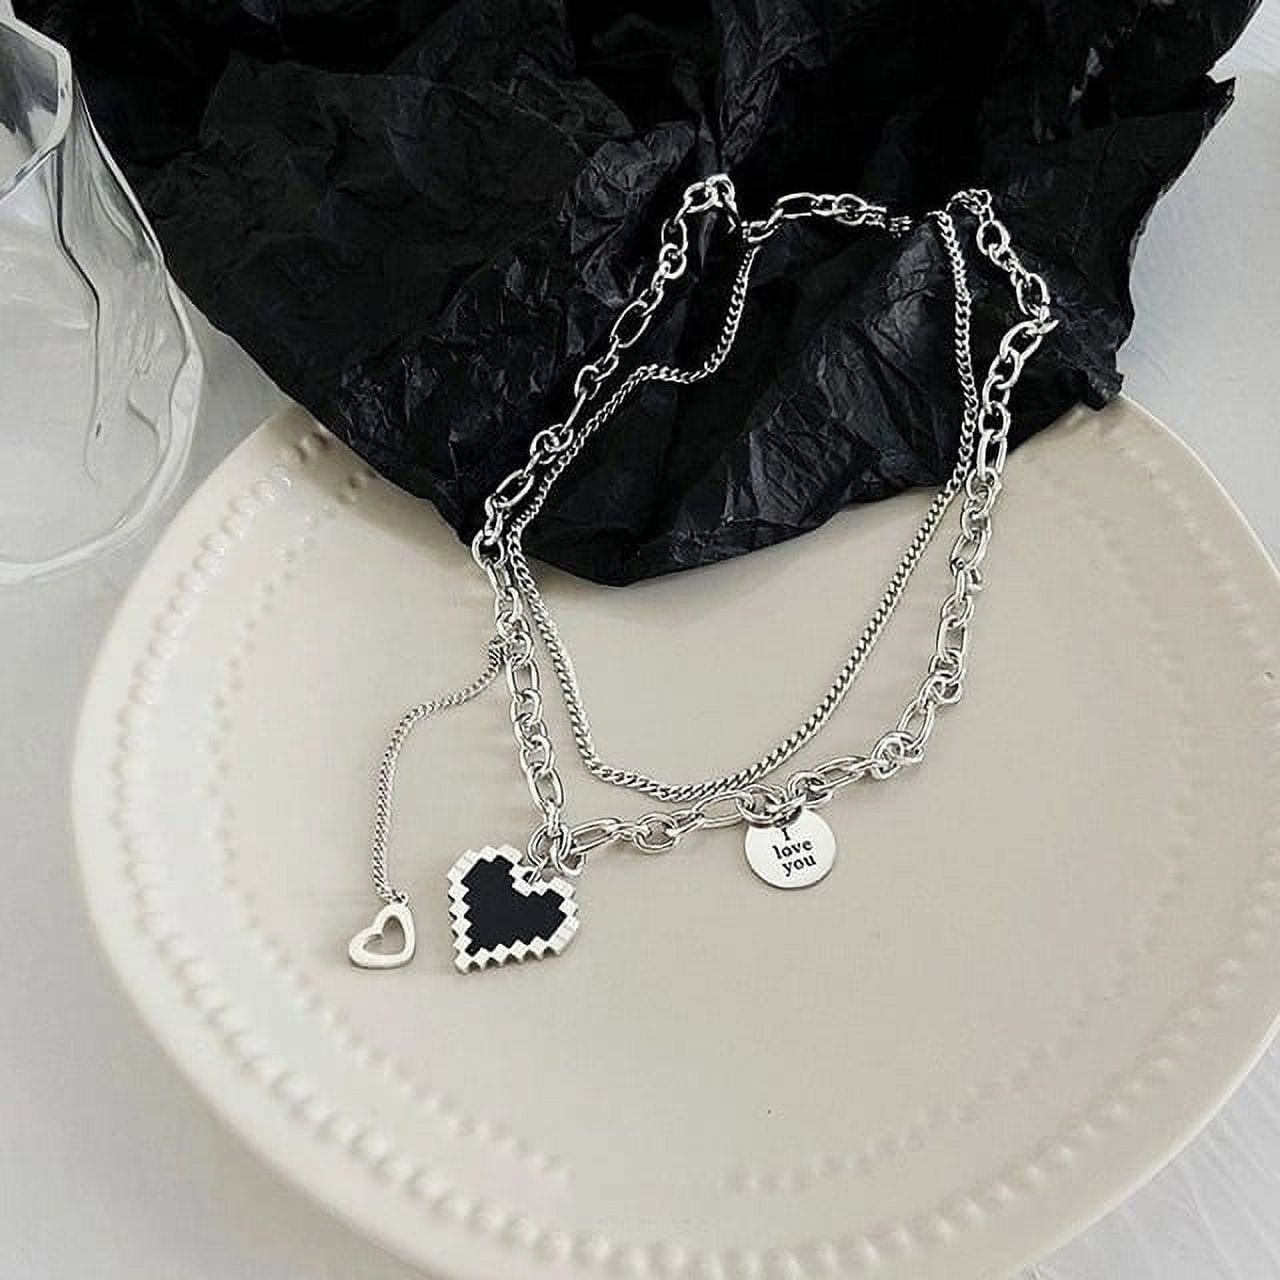 QWZNDZGR 2022 Harajuku Fashion Multilayer Grunge Kpop Chain Necklace For  Women Men Jewelry Gifts Key Cross Pendant Necklace Accessories 